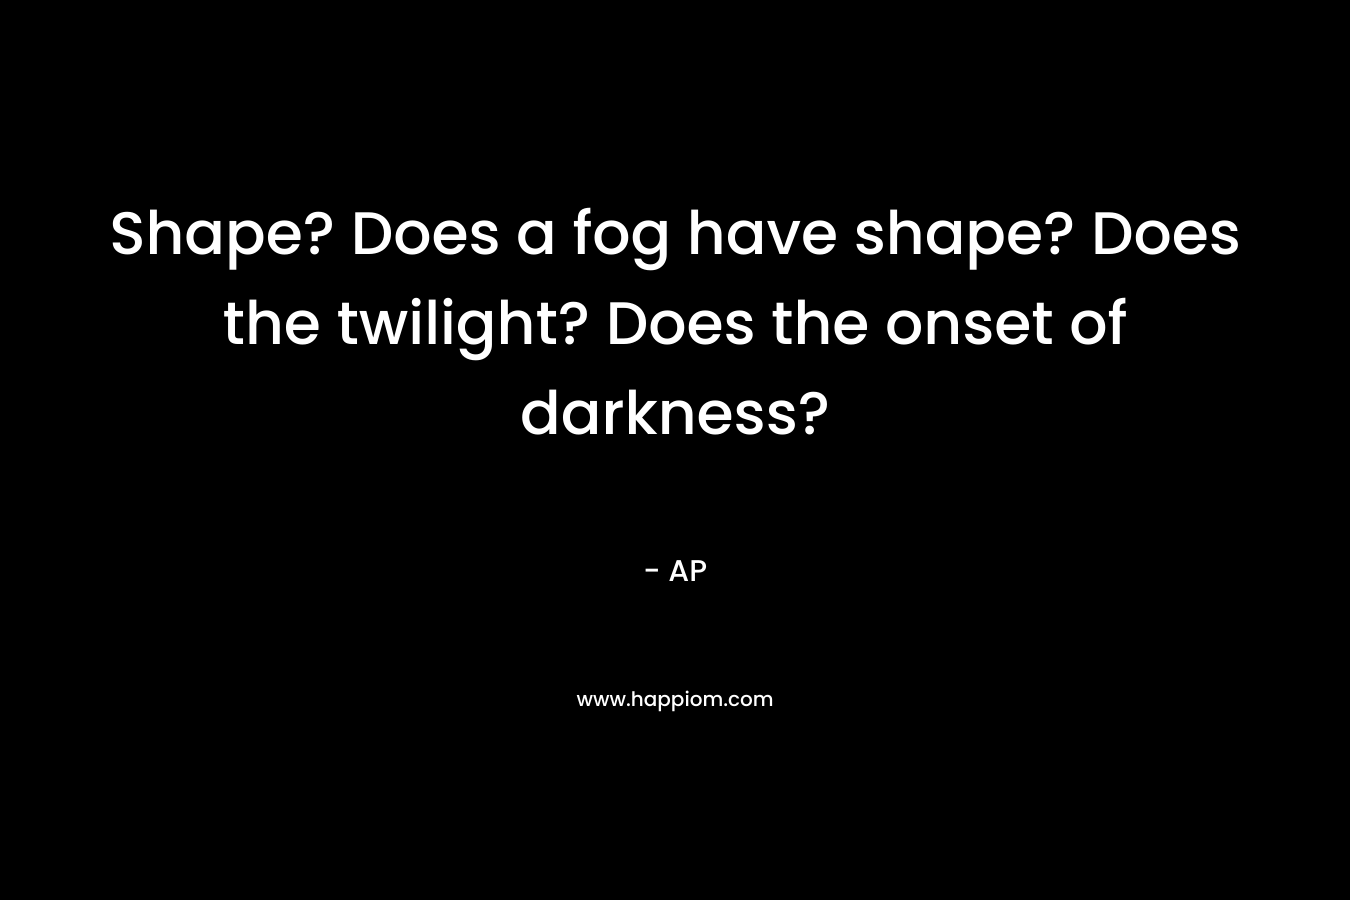 Shape? Does a fog have shape? Does the twilight? Does the onset of darkness?